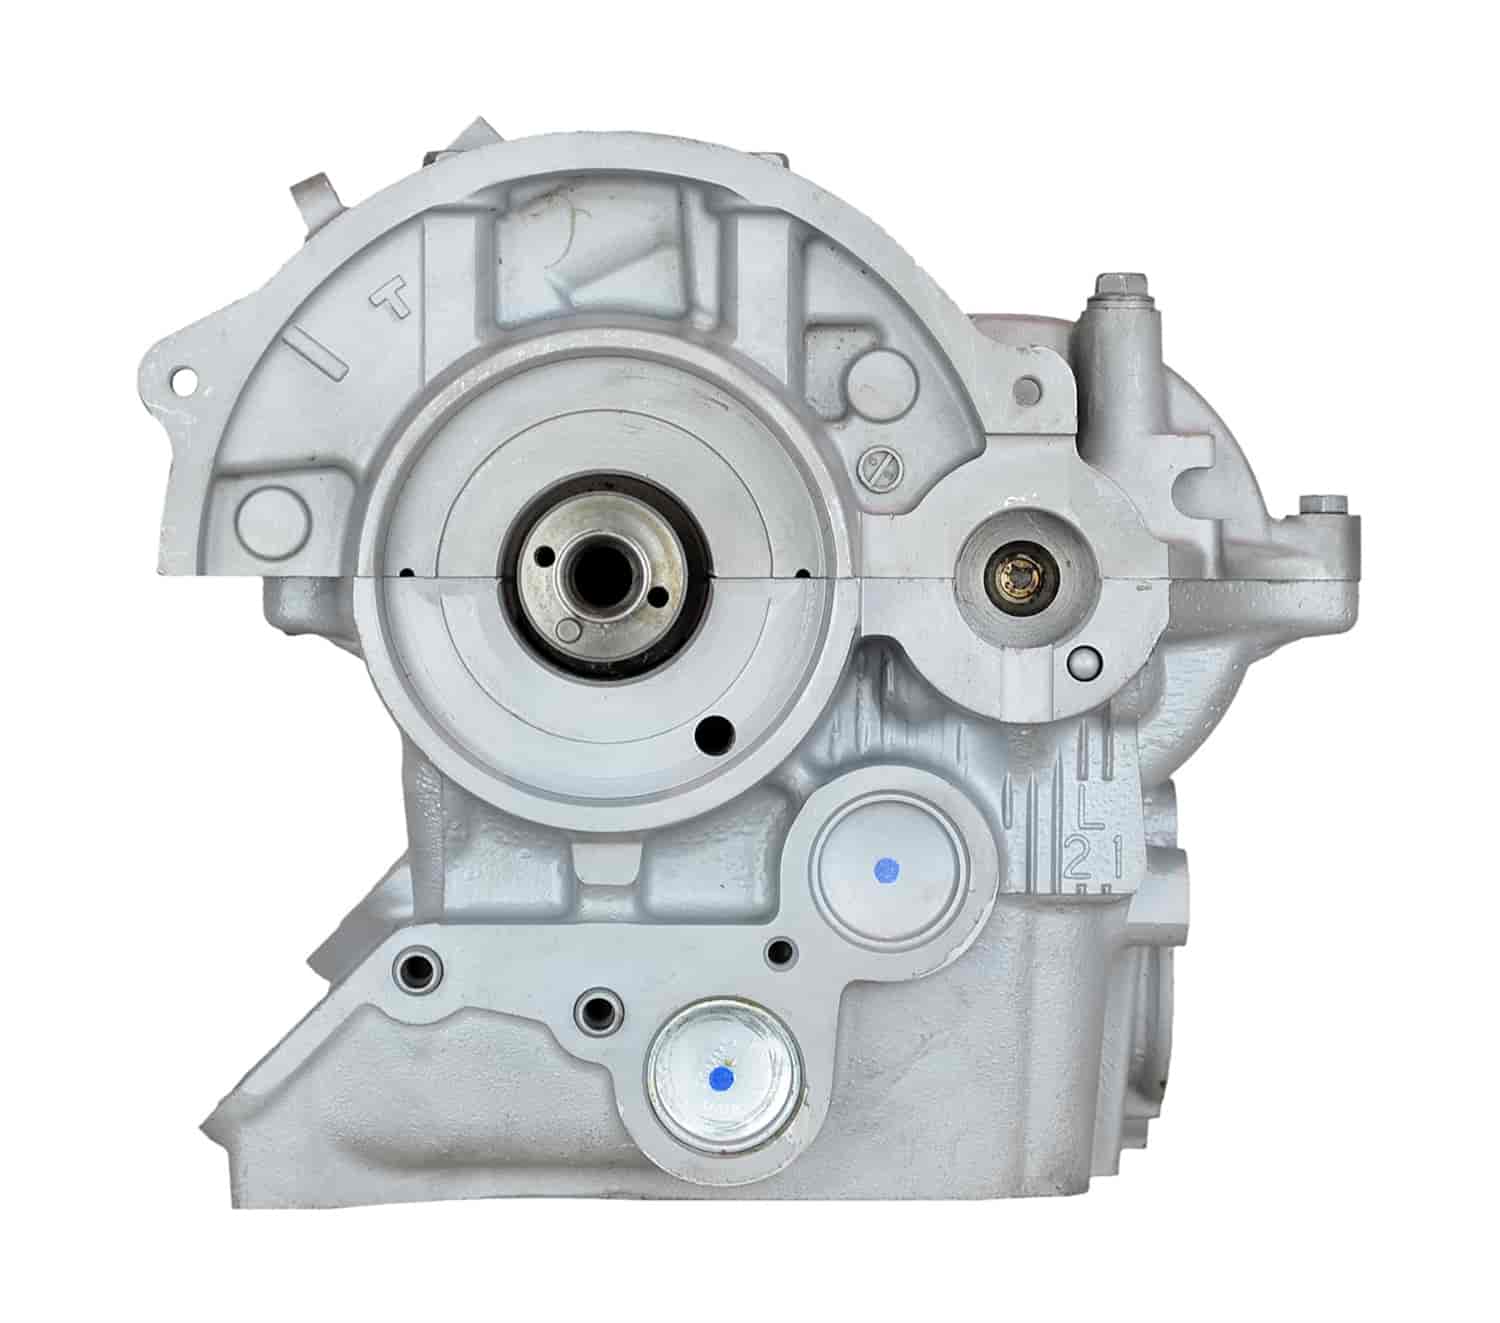 Remanufactured Cylinder Head for 1997-2010 Toyota/Lexus with 4.0/4.3L V8 1UZFE/3UZFE